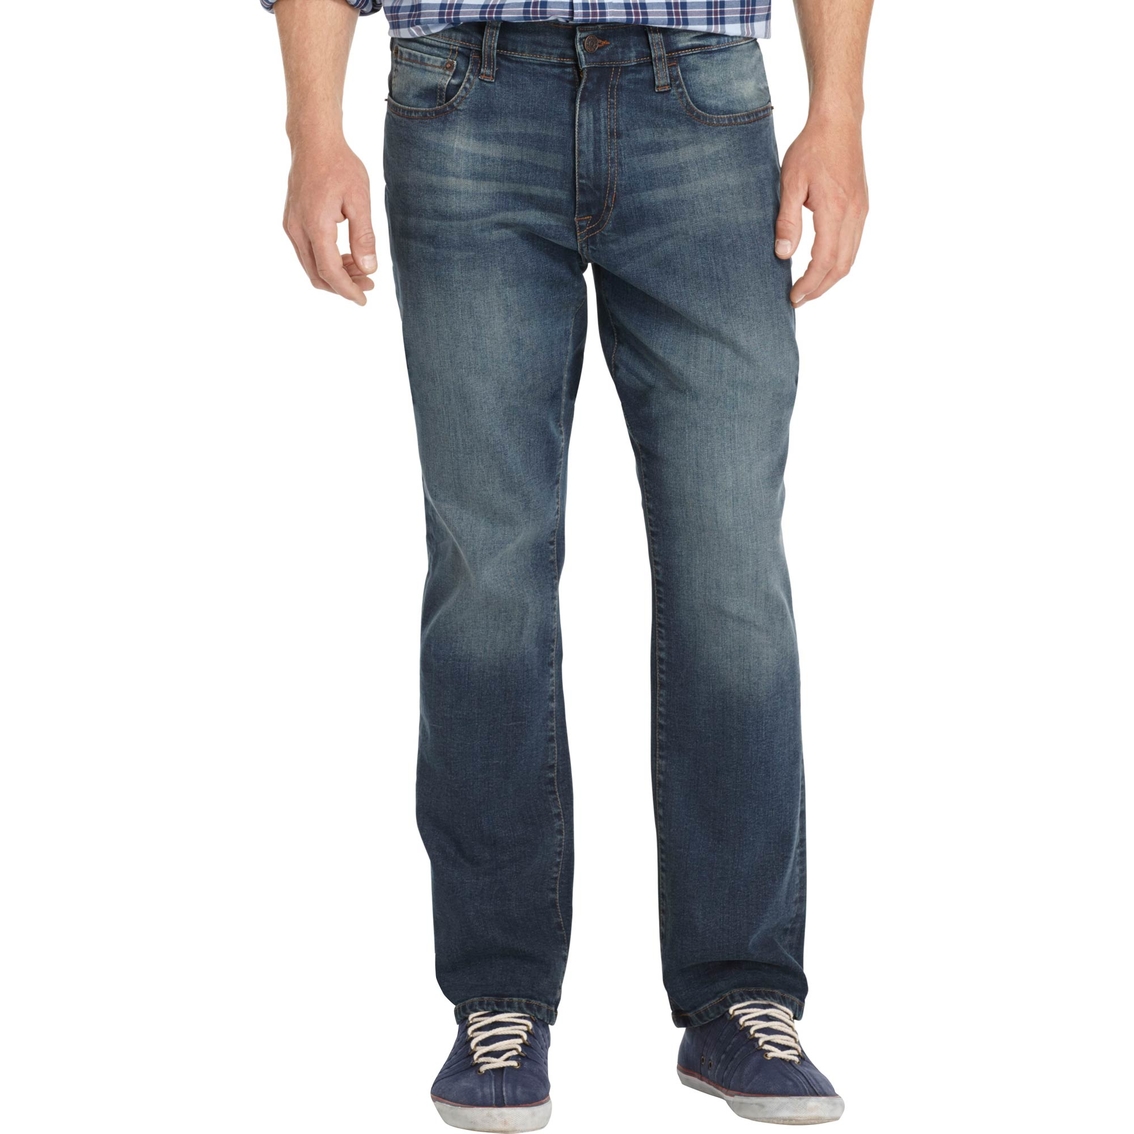 Izod Comfort Stretch Relaxed Fit Jeans | Saturday - Wk 77 | Shop The ...